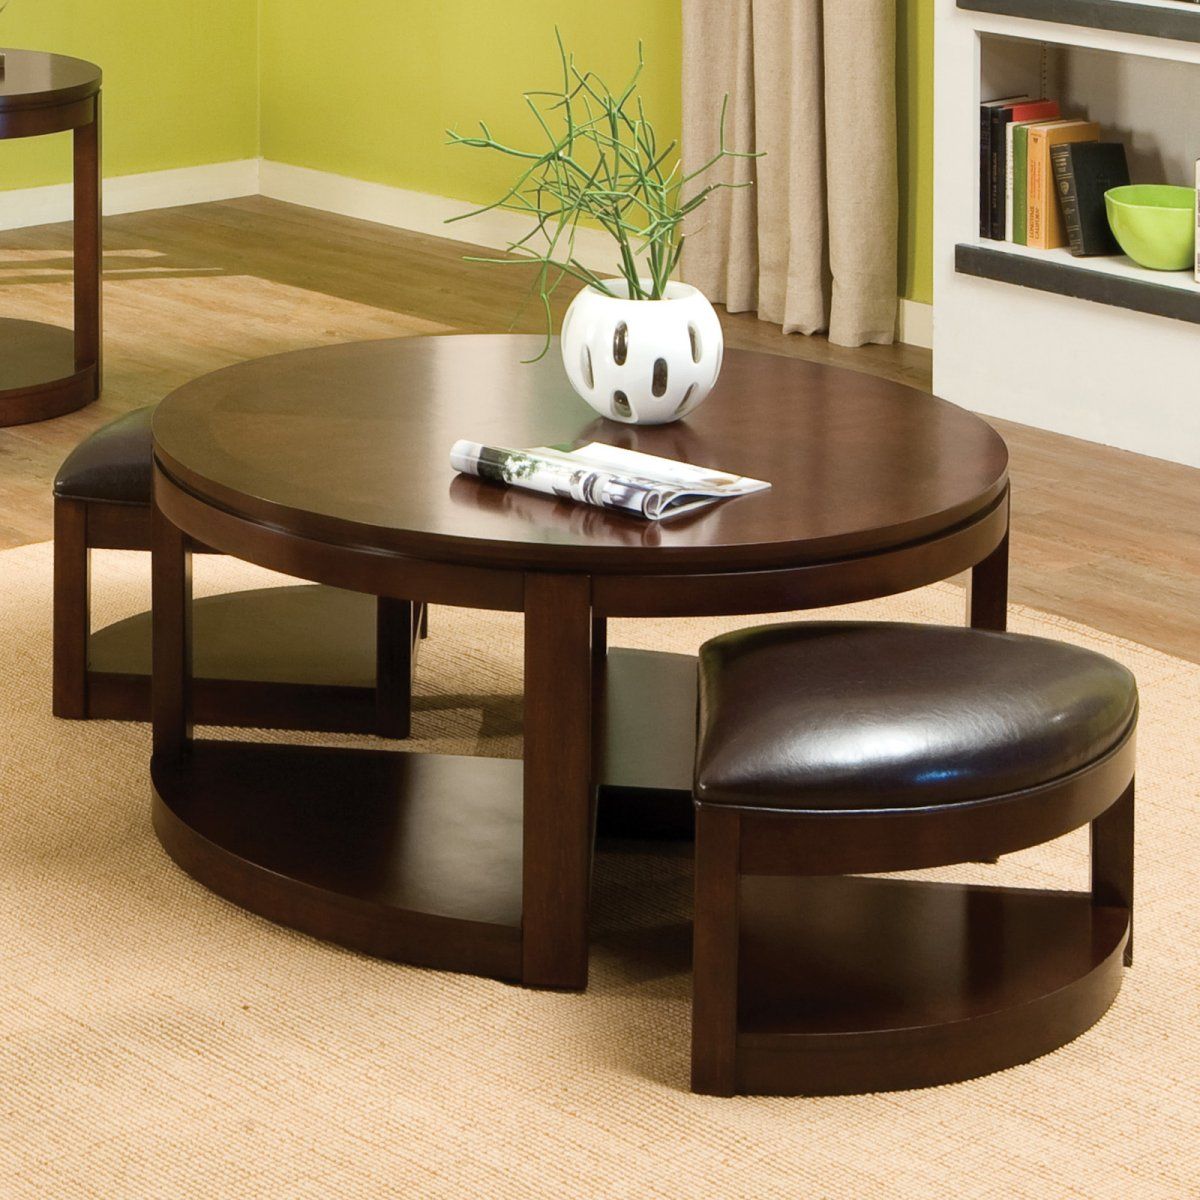 The Round Coffee Tables With Storage – The Simple And Compact Furniture Pertaining To Round Coffee Tables With Storage (Gallery 5 of 20)